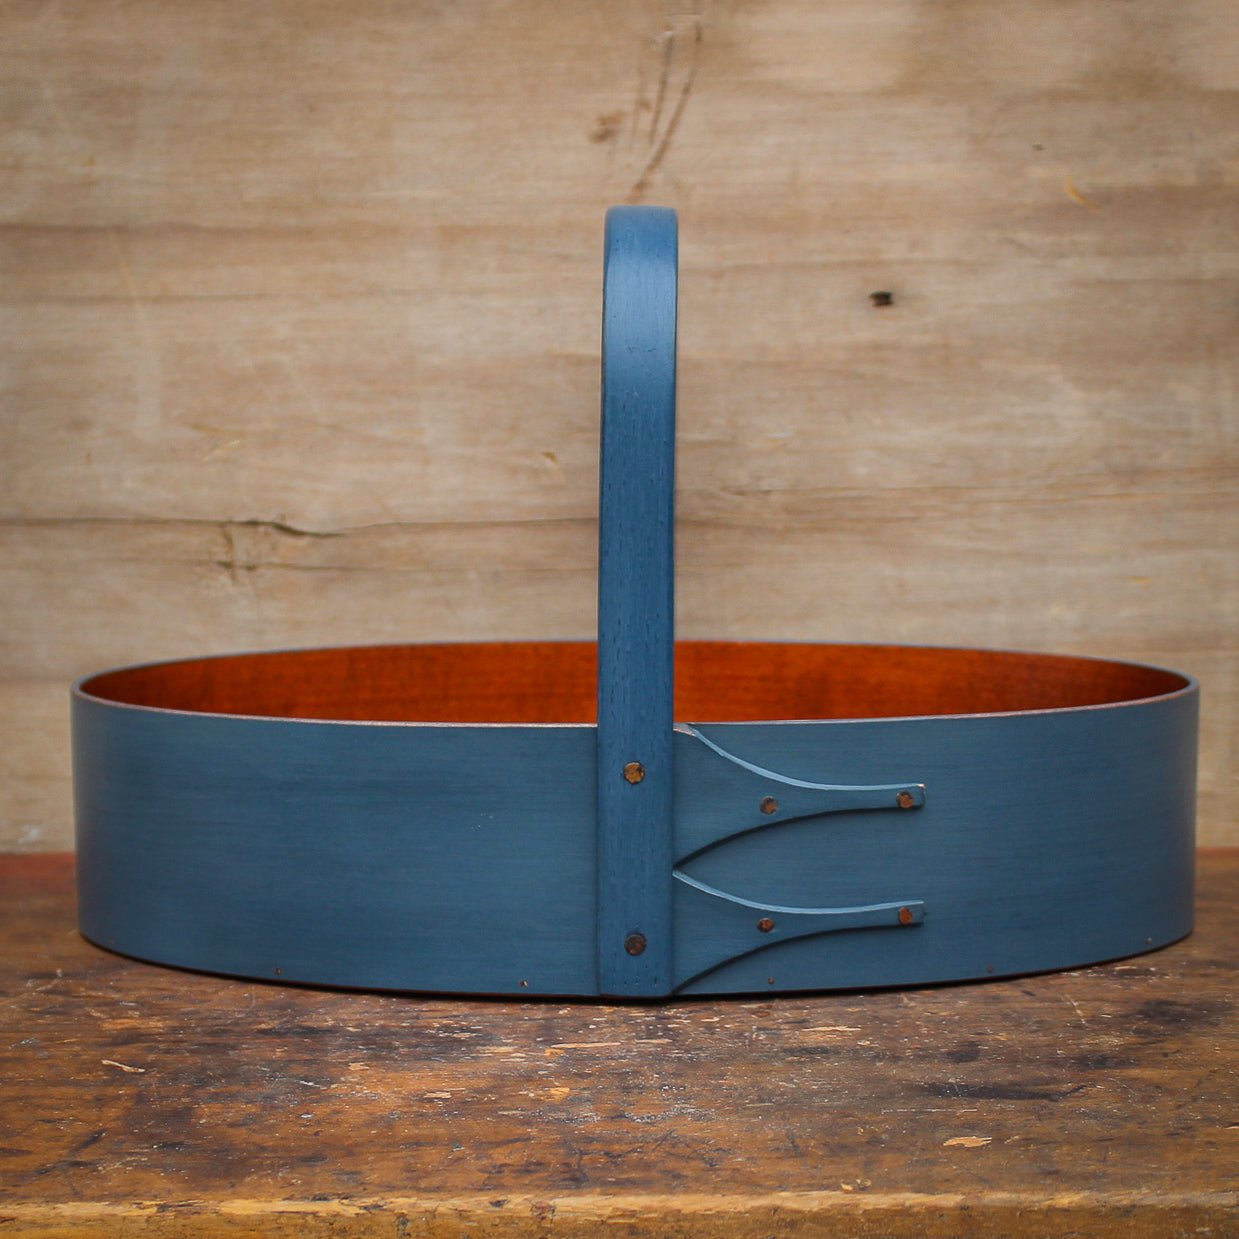 Large Shaker Style Sewing Carrier, LeHays Shaker Boxes, Handcrafted in Maine, Blue Milk Paint Finish, Front View